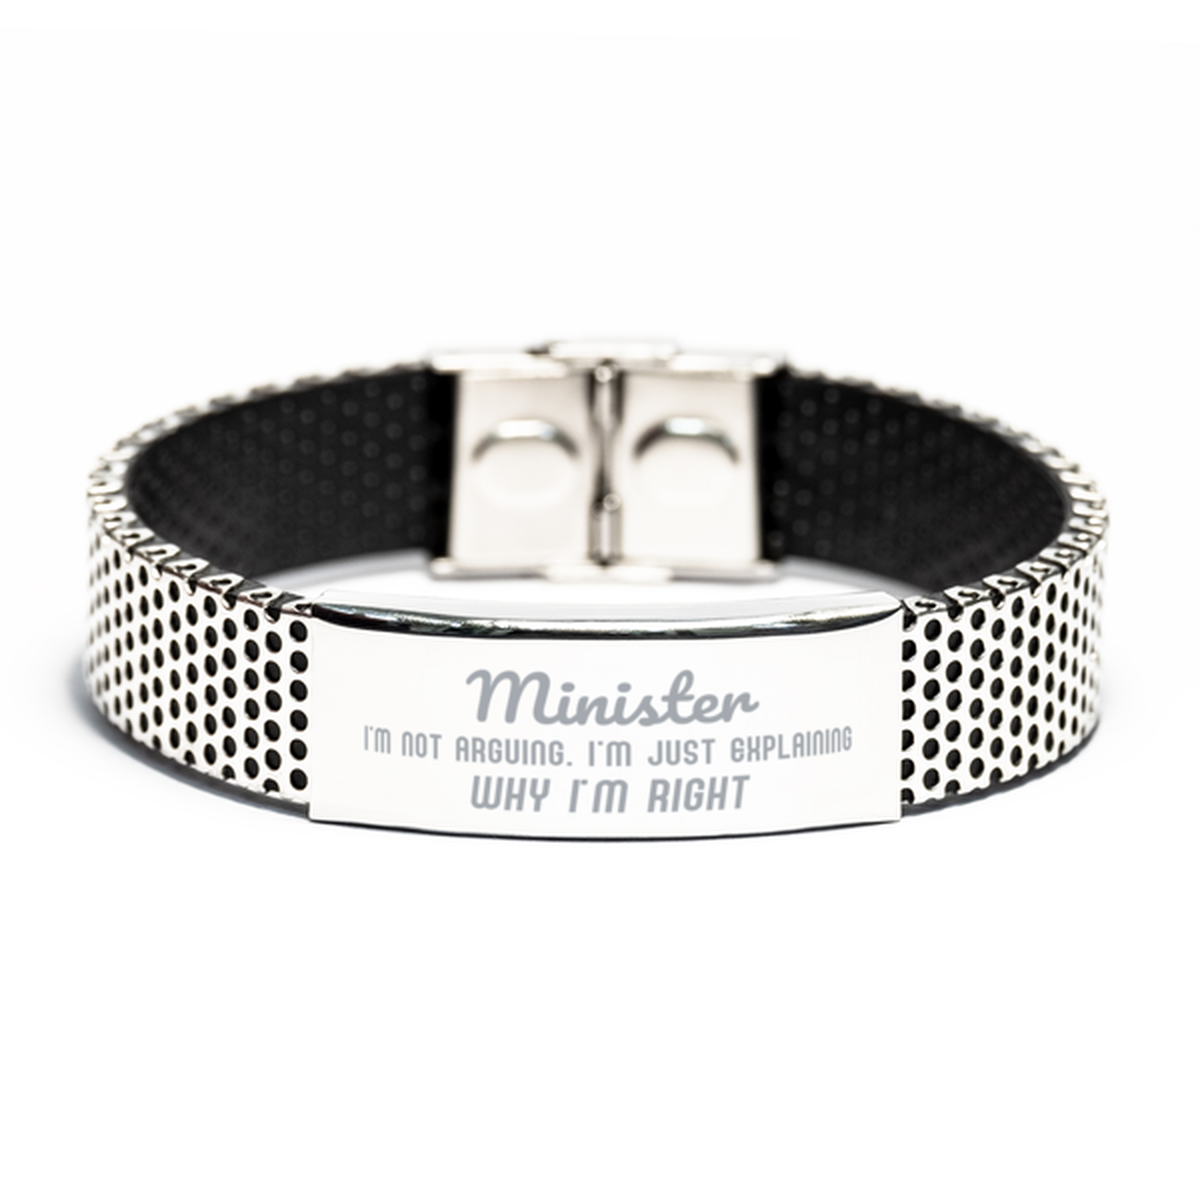 Minister I'm not Arguing. I'm Just Explaining Why I'm RIGHT Stainless Steel Bracelet, Funny Saying Quote Minister Gifts For Minister Graduation Birthday Christmas Gifts for Men Women Coworker